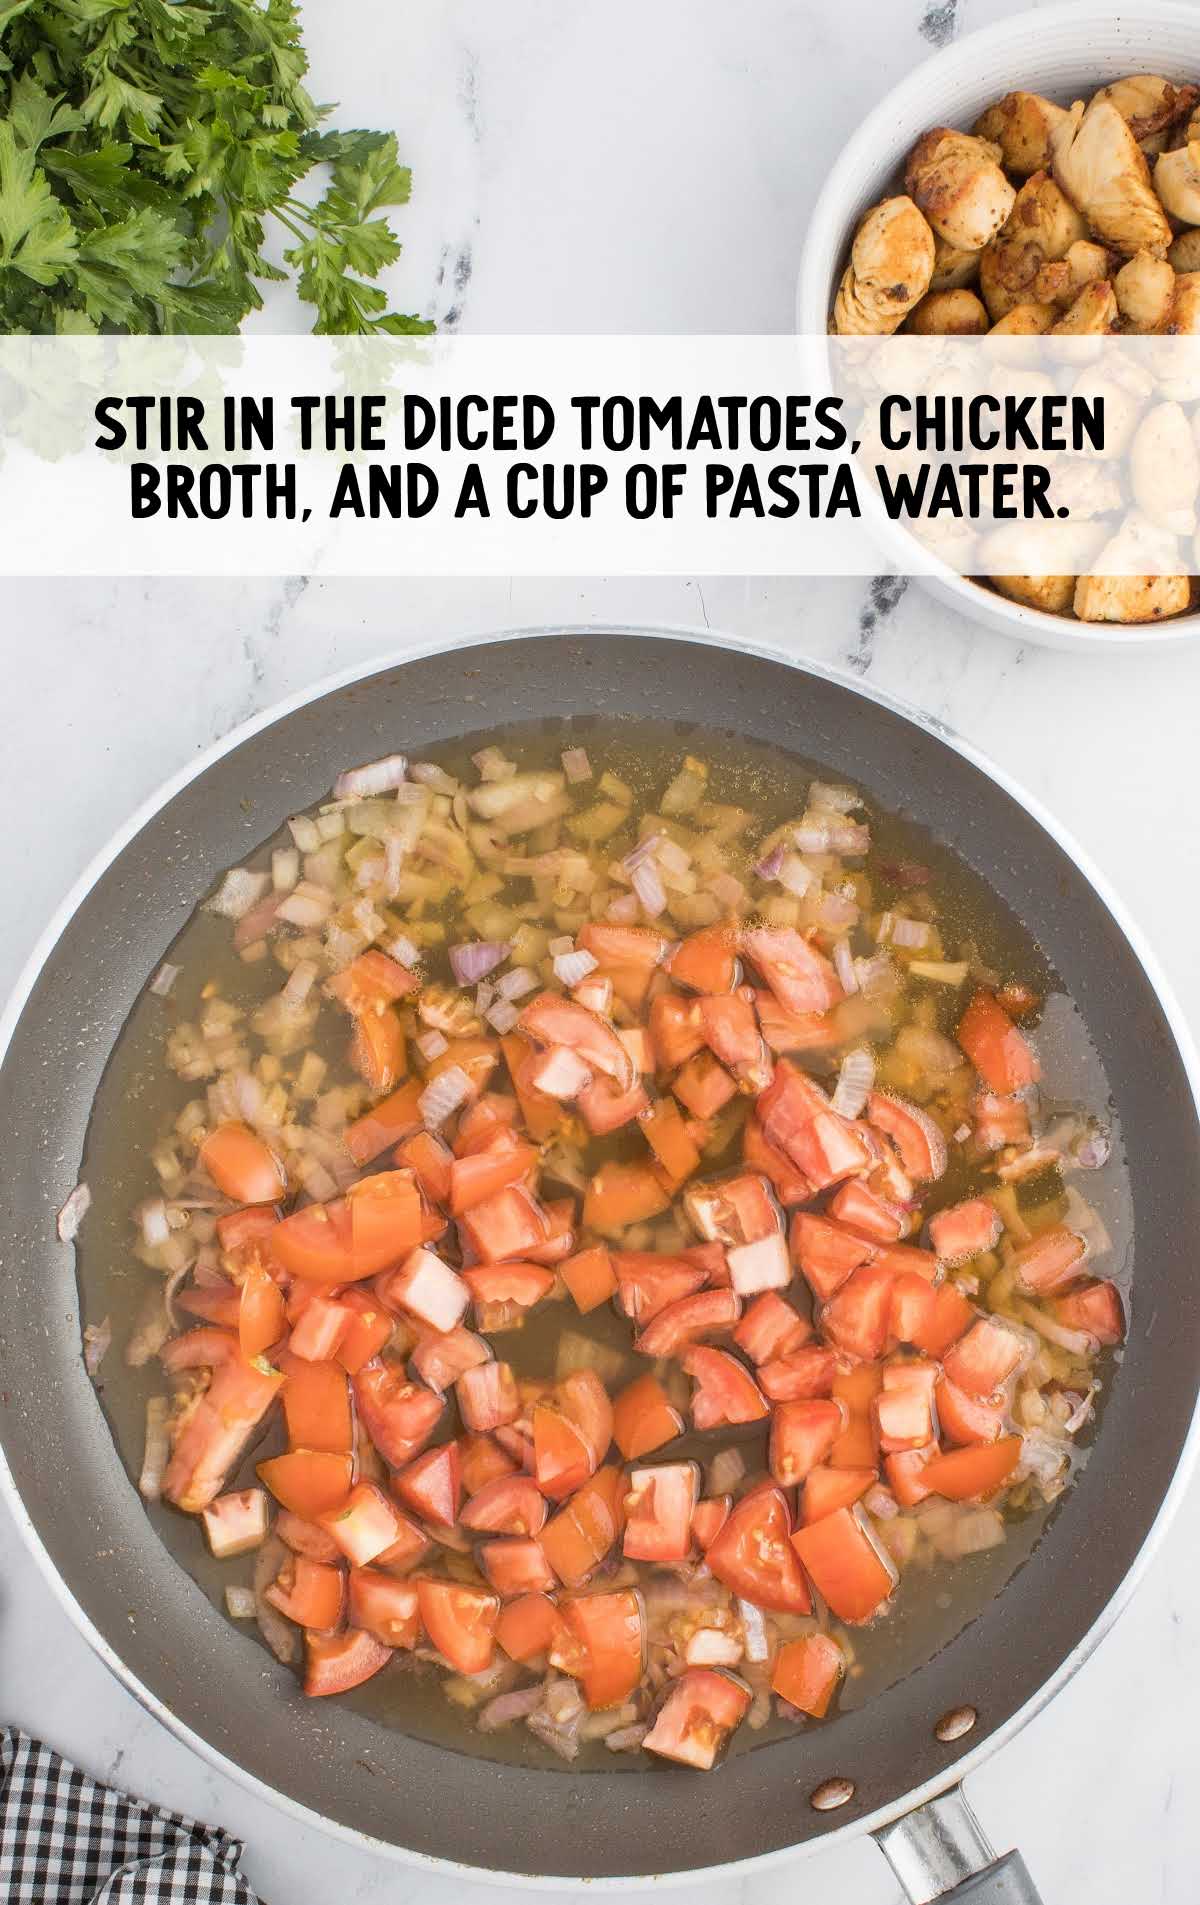 diced tomatoes, chicken broth, and pasta water added to the skillet